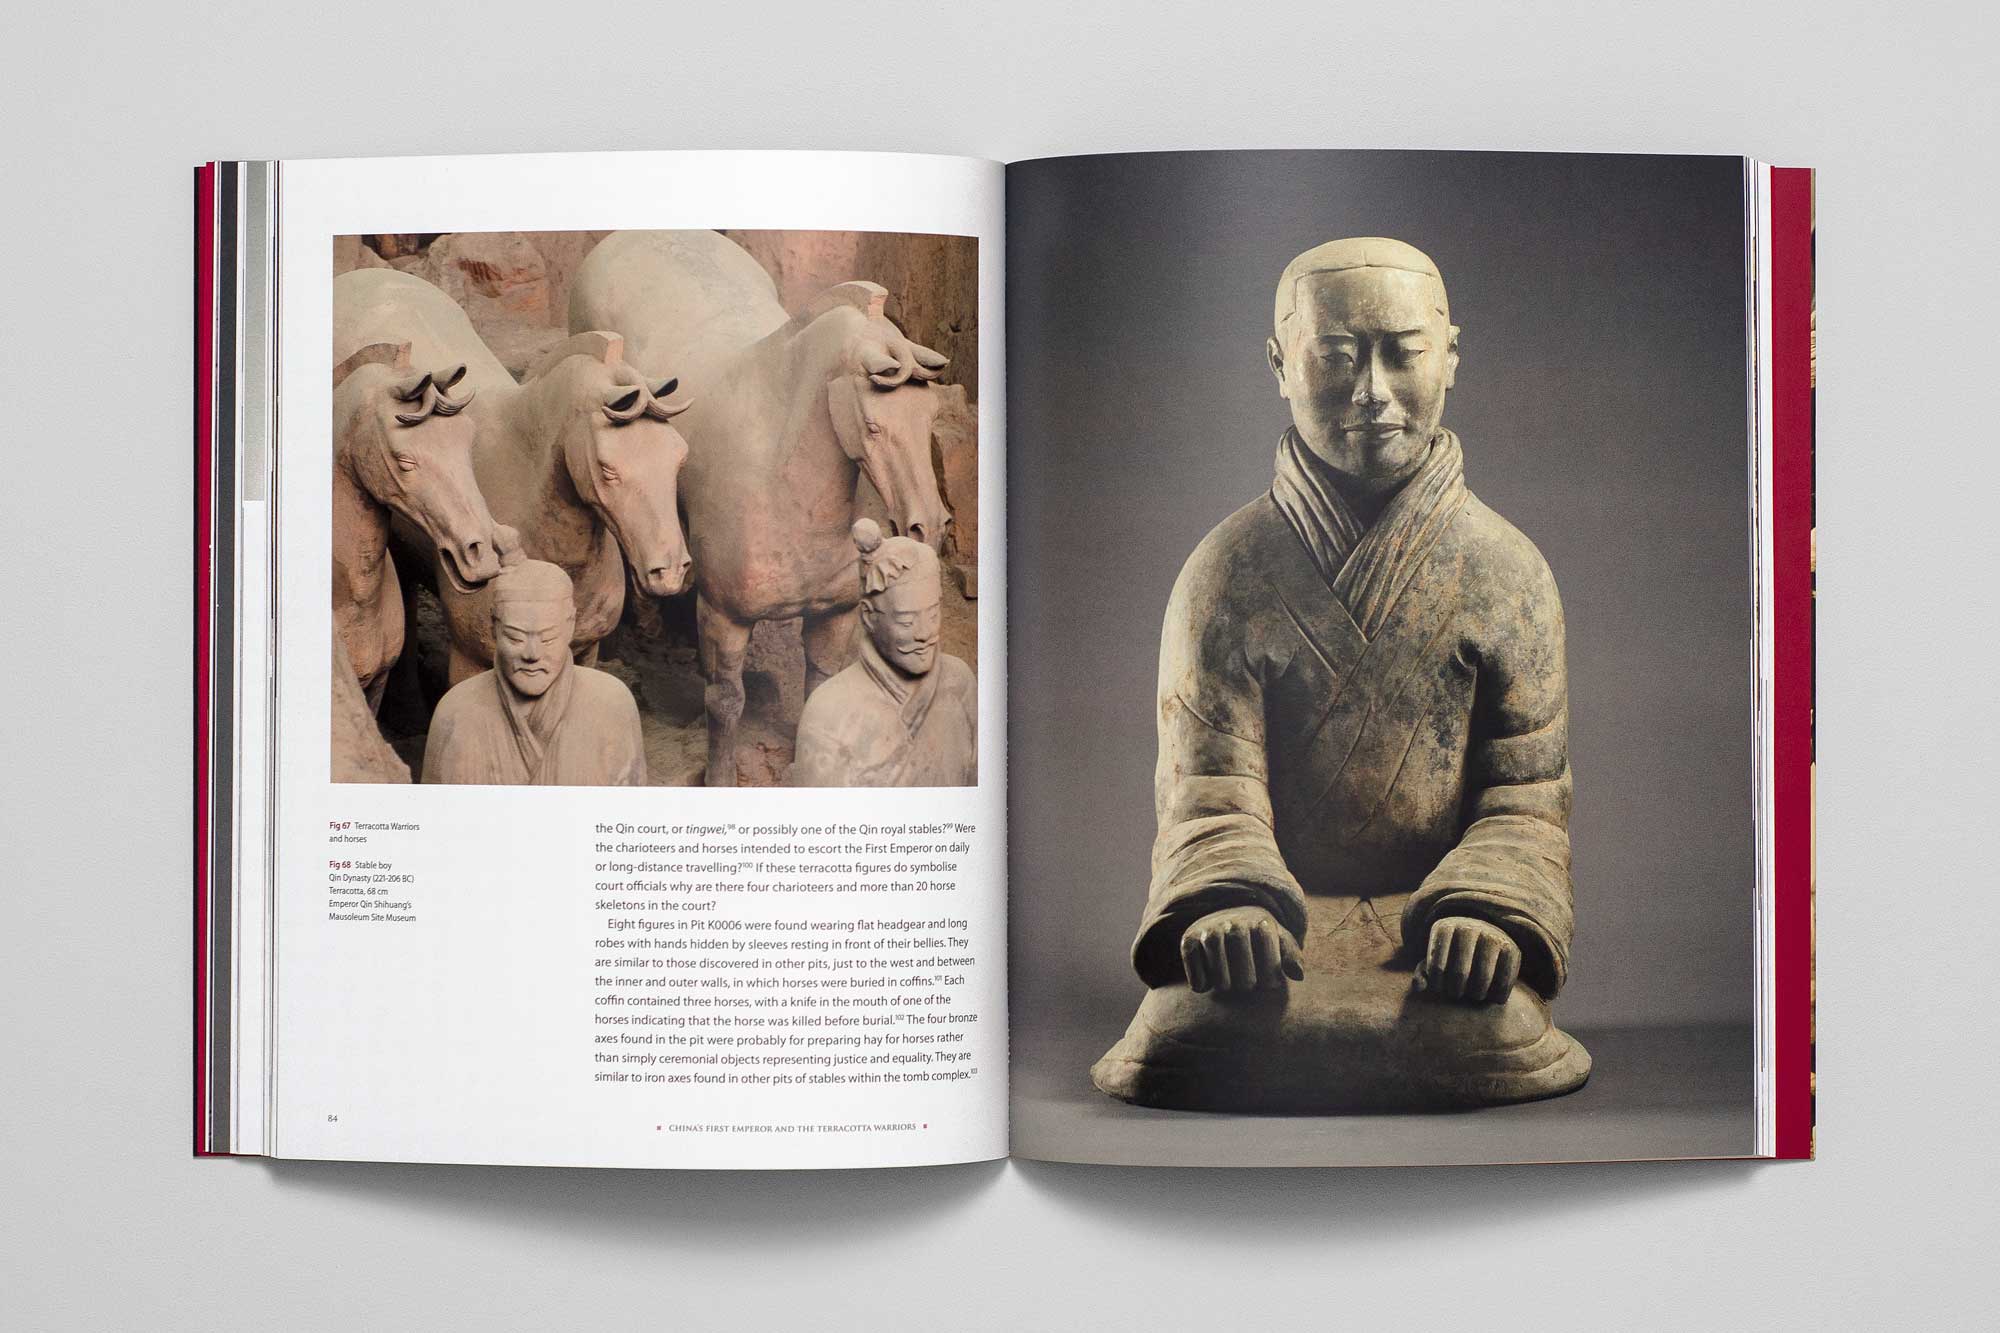 China's First Emperor and the Terracotta Warriors